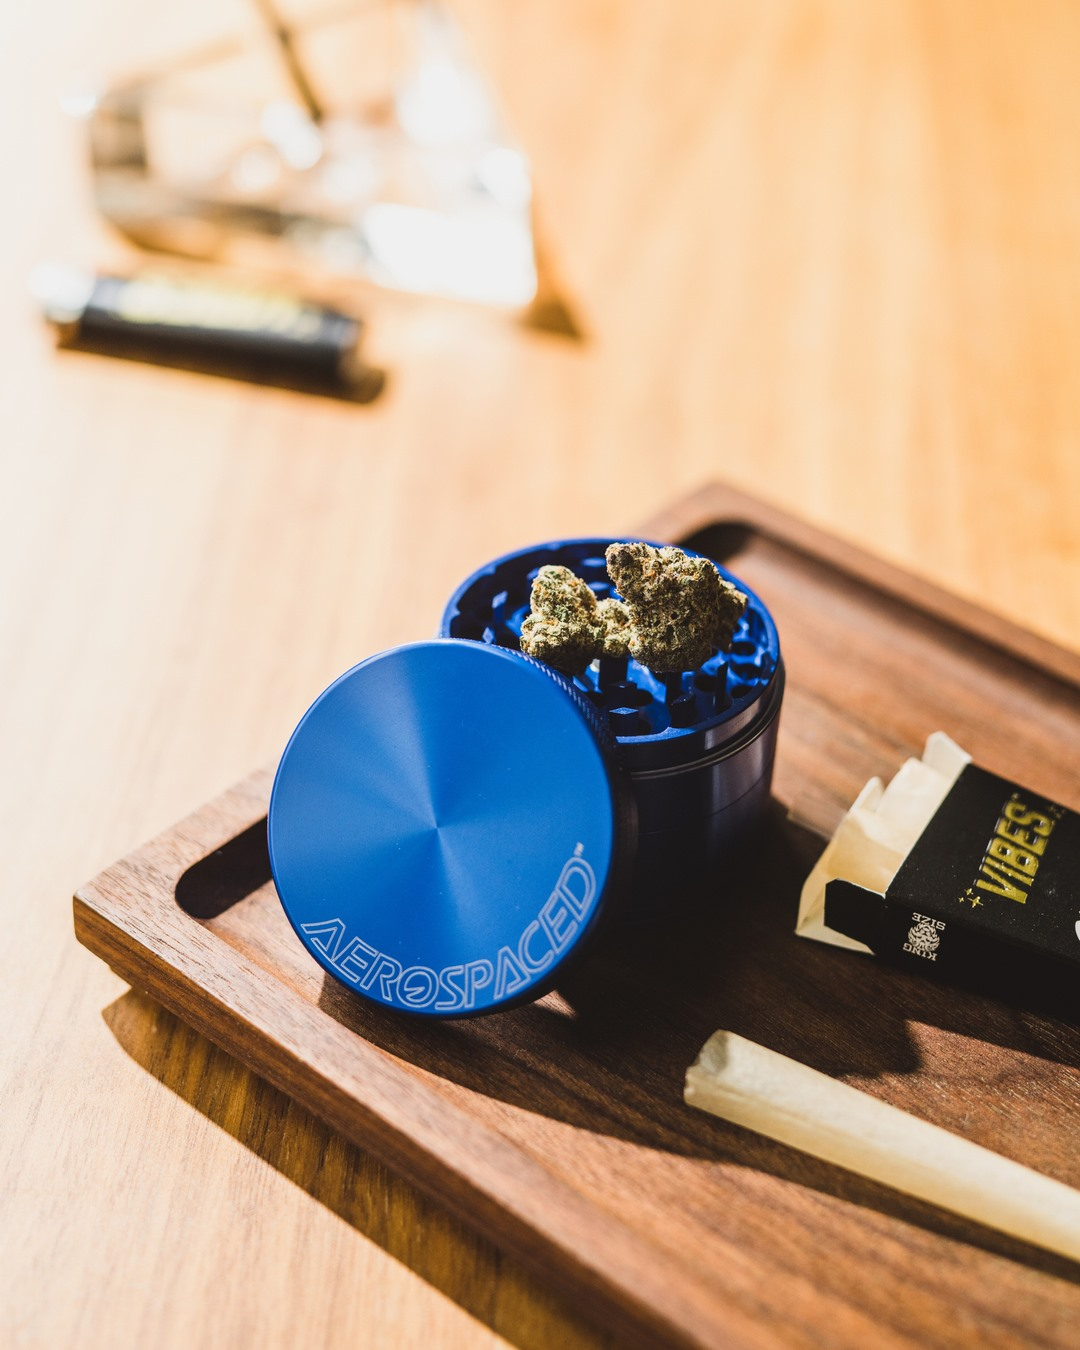 The 24 Best Weed Accessories and Gear